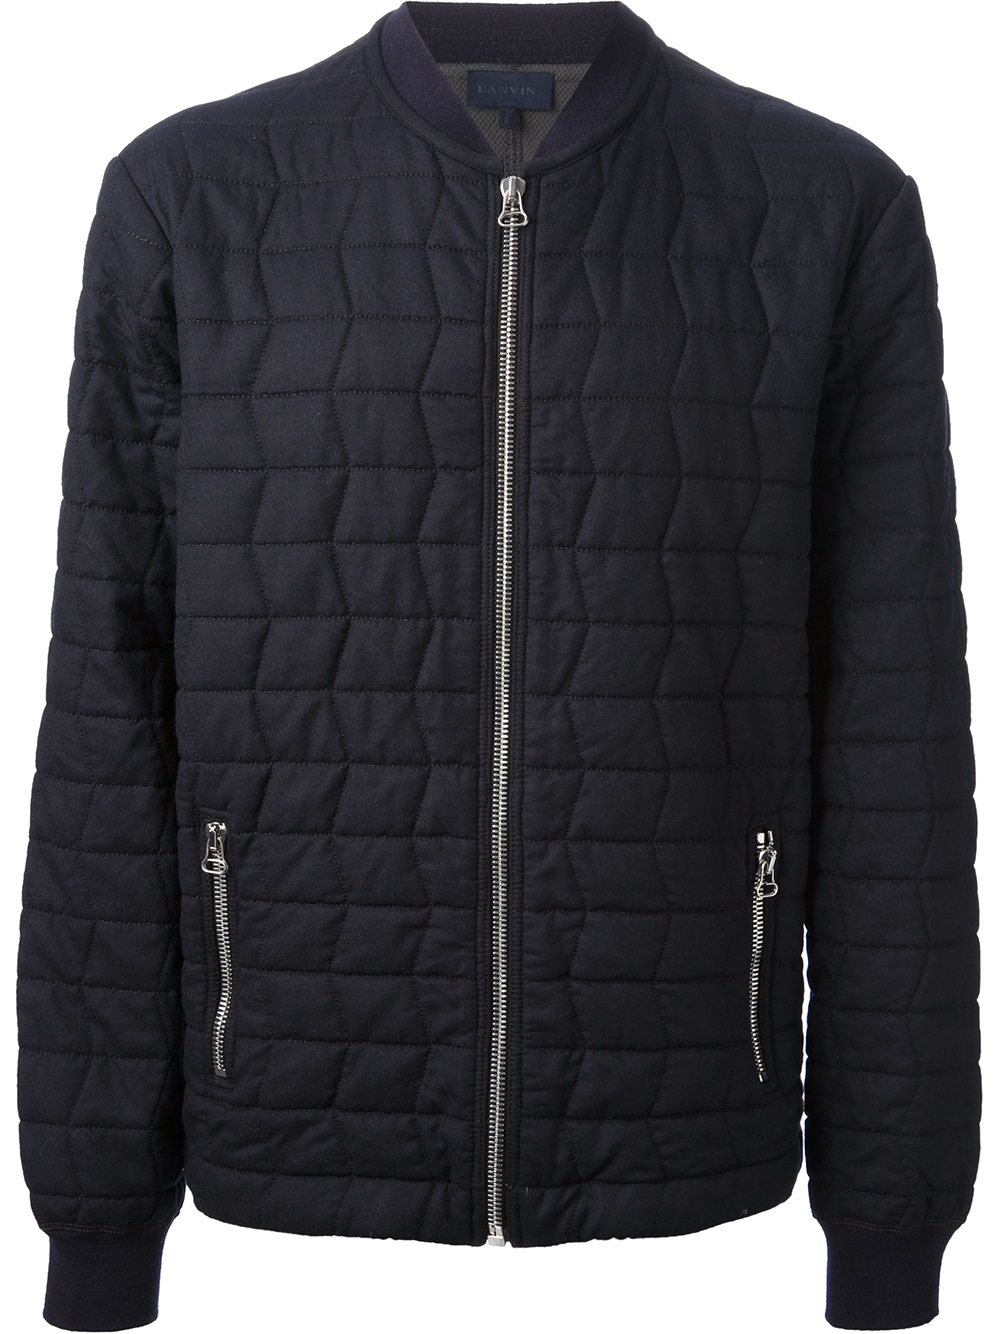 Lyst - Lanvin Quilted Jacket in Blue for Men